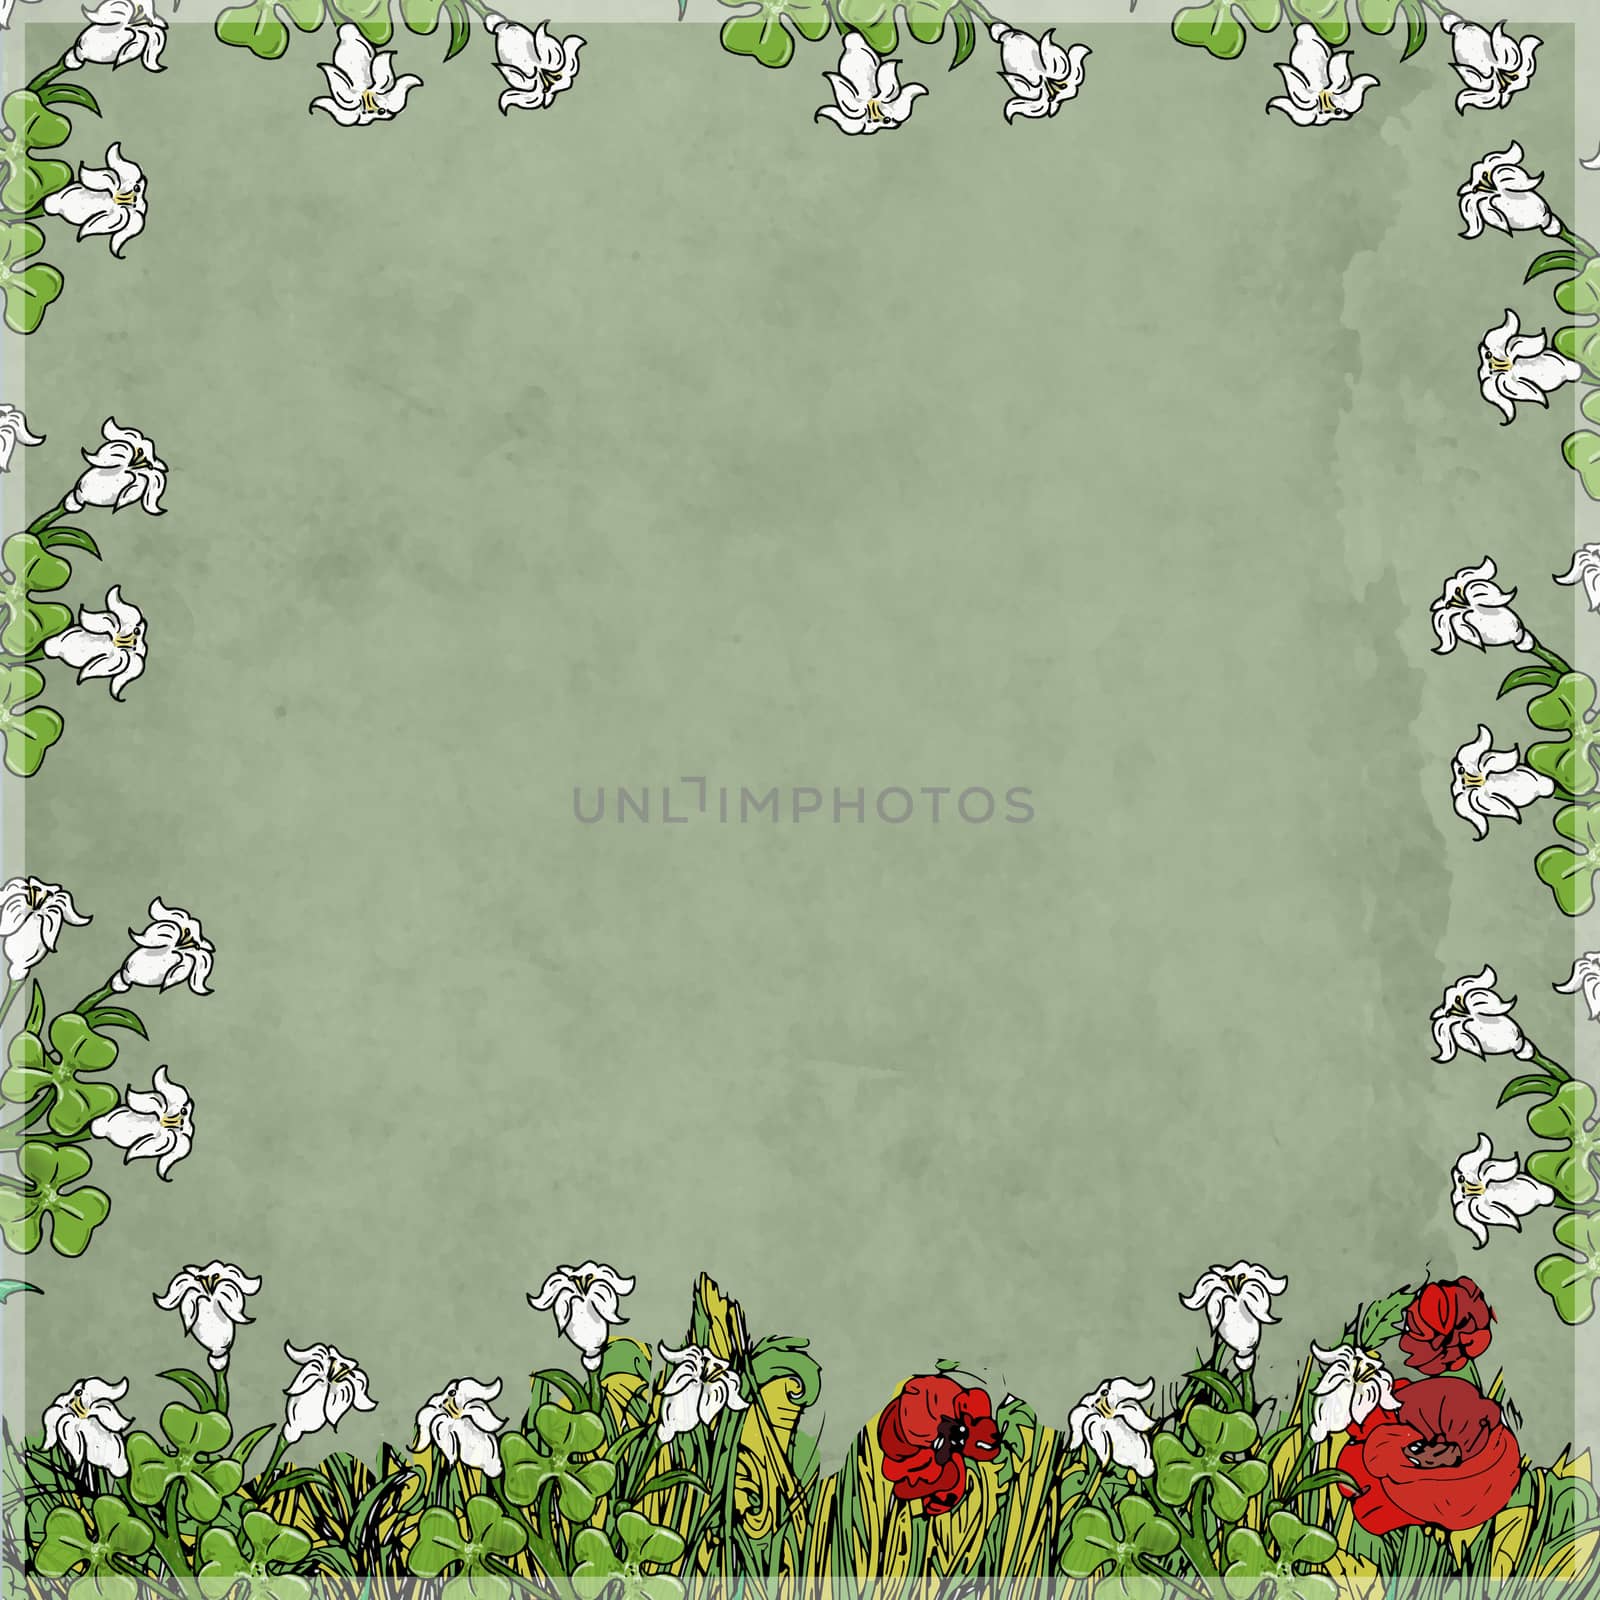 Flower frame with gray background